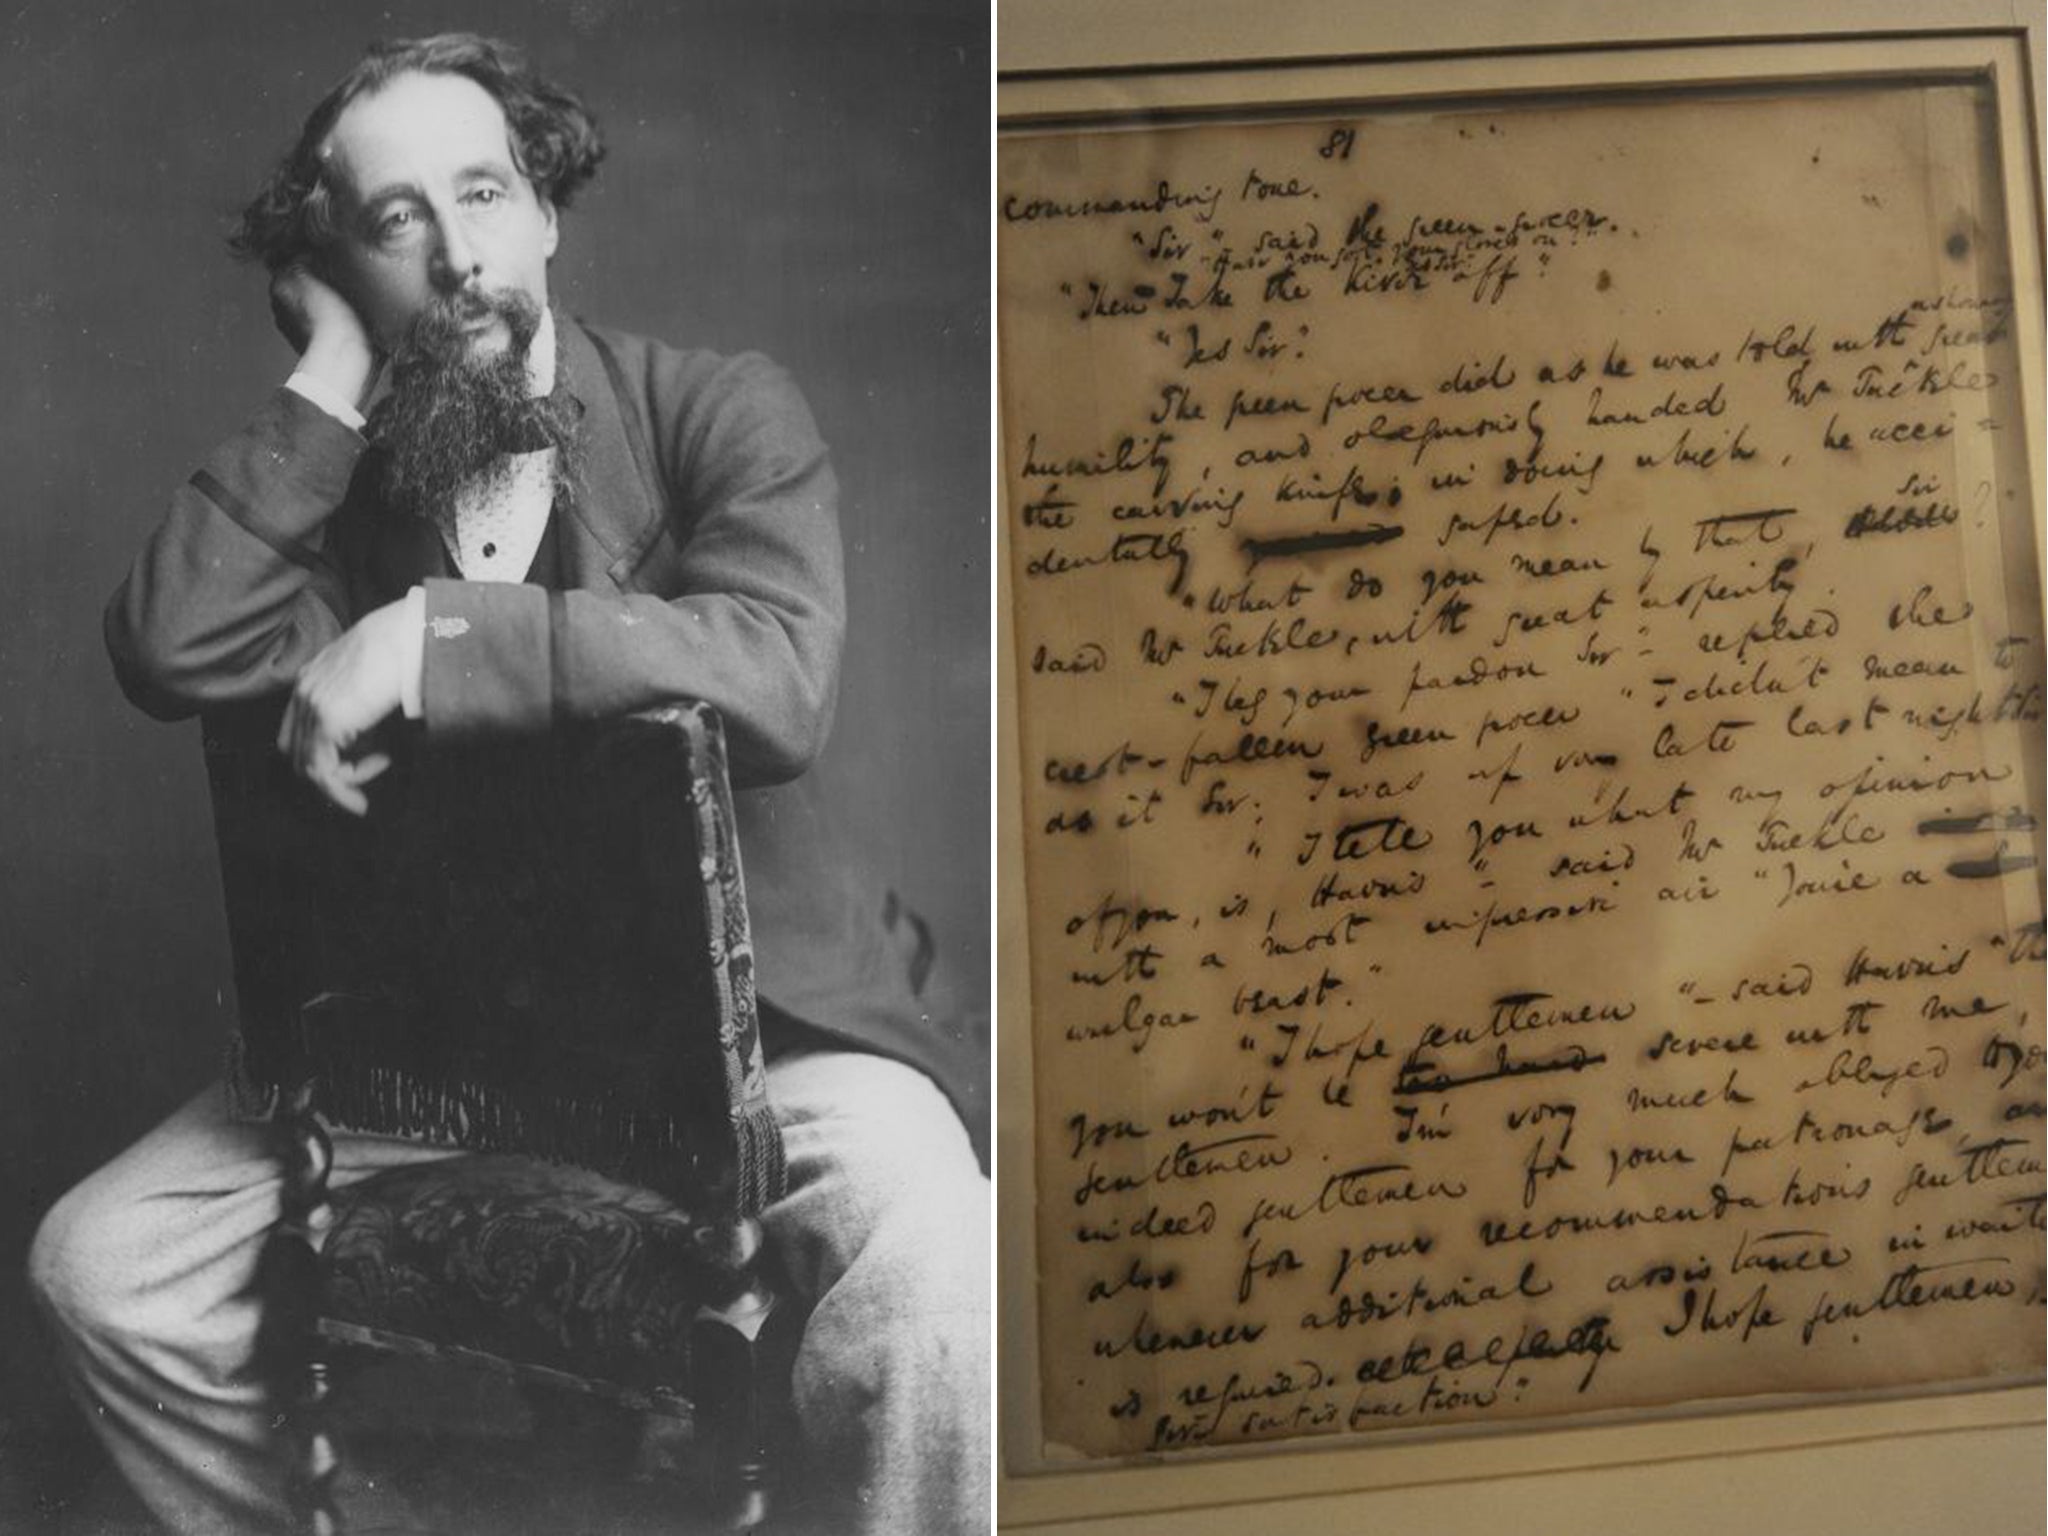 Charles Dickens died in 1870, after which his son edited the journal